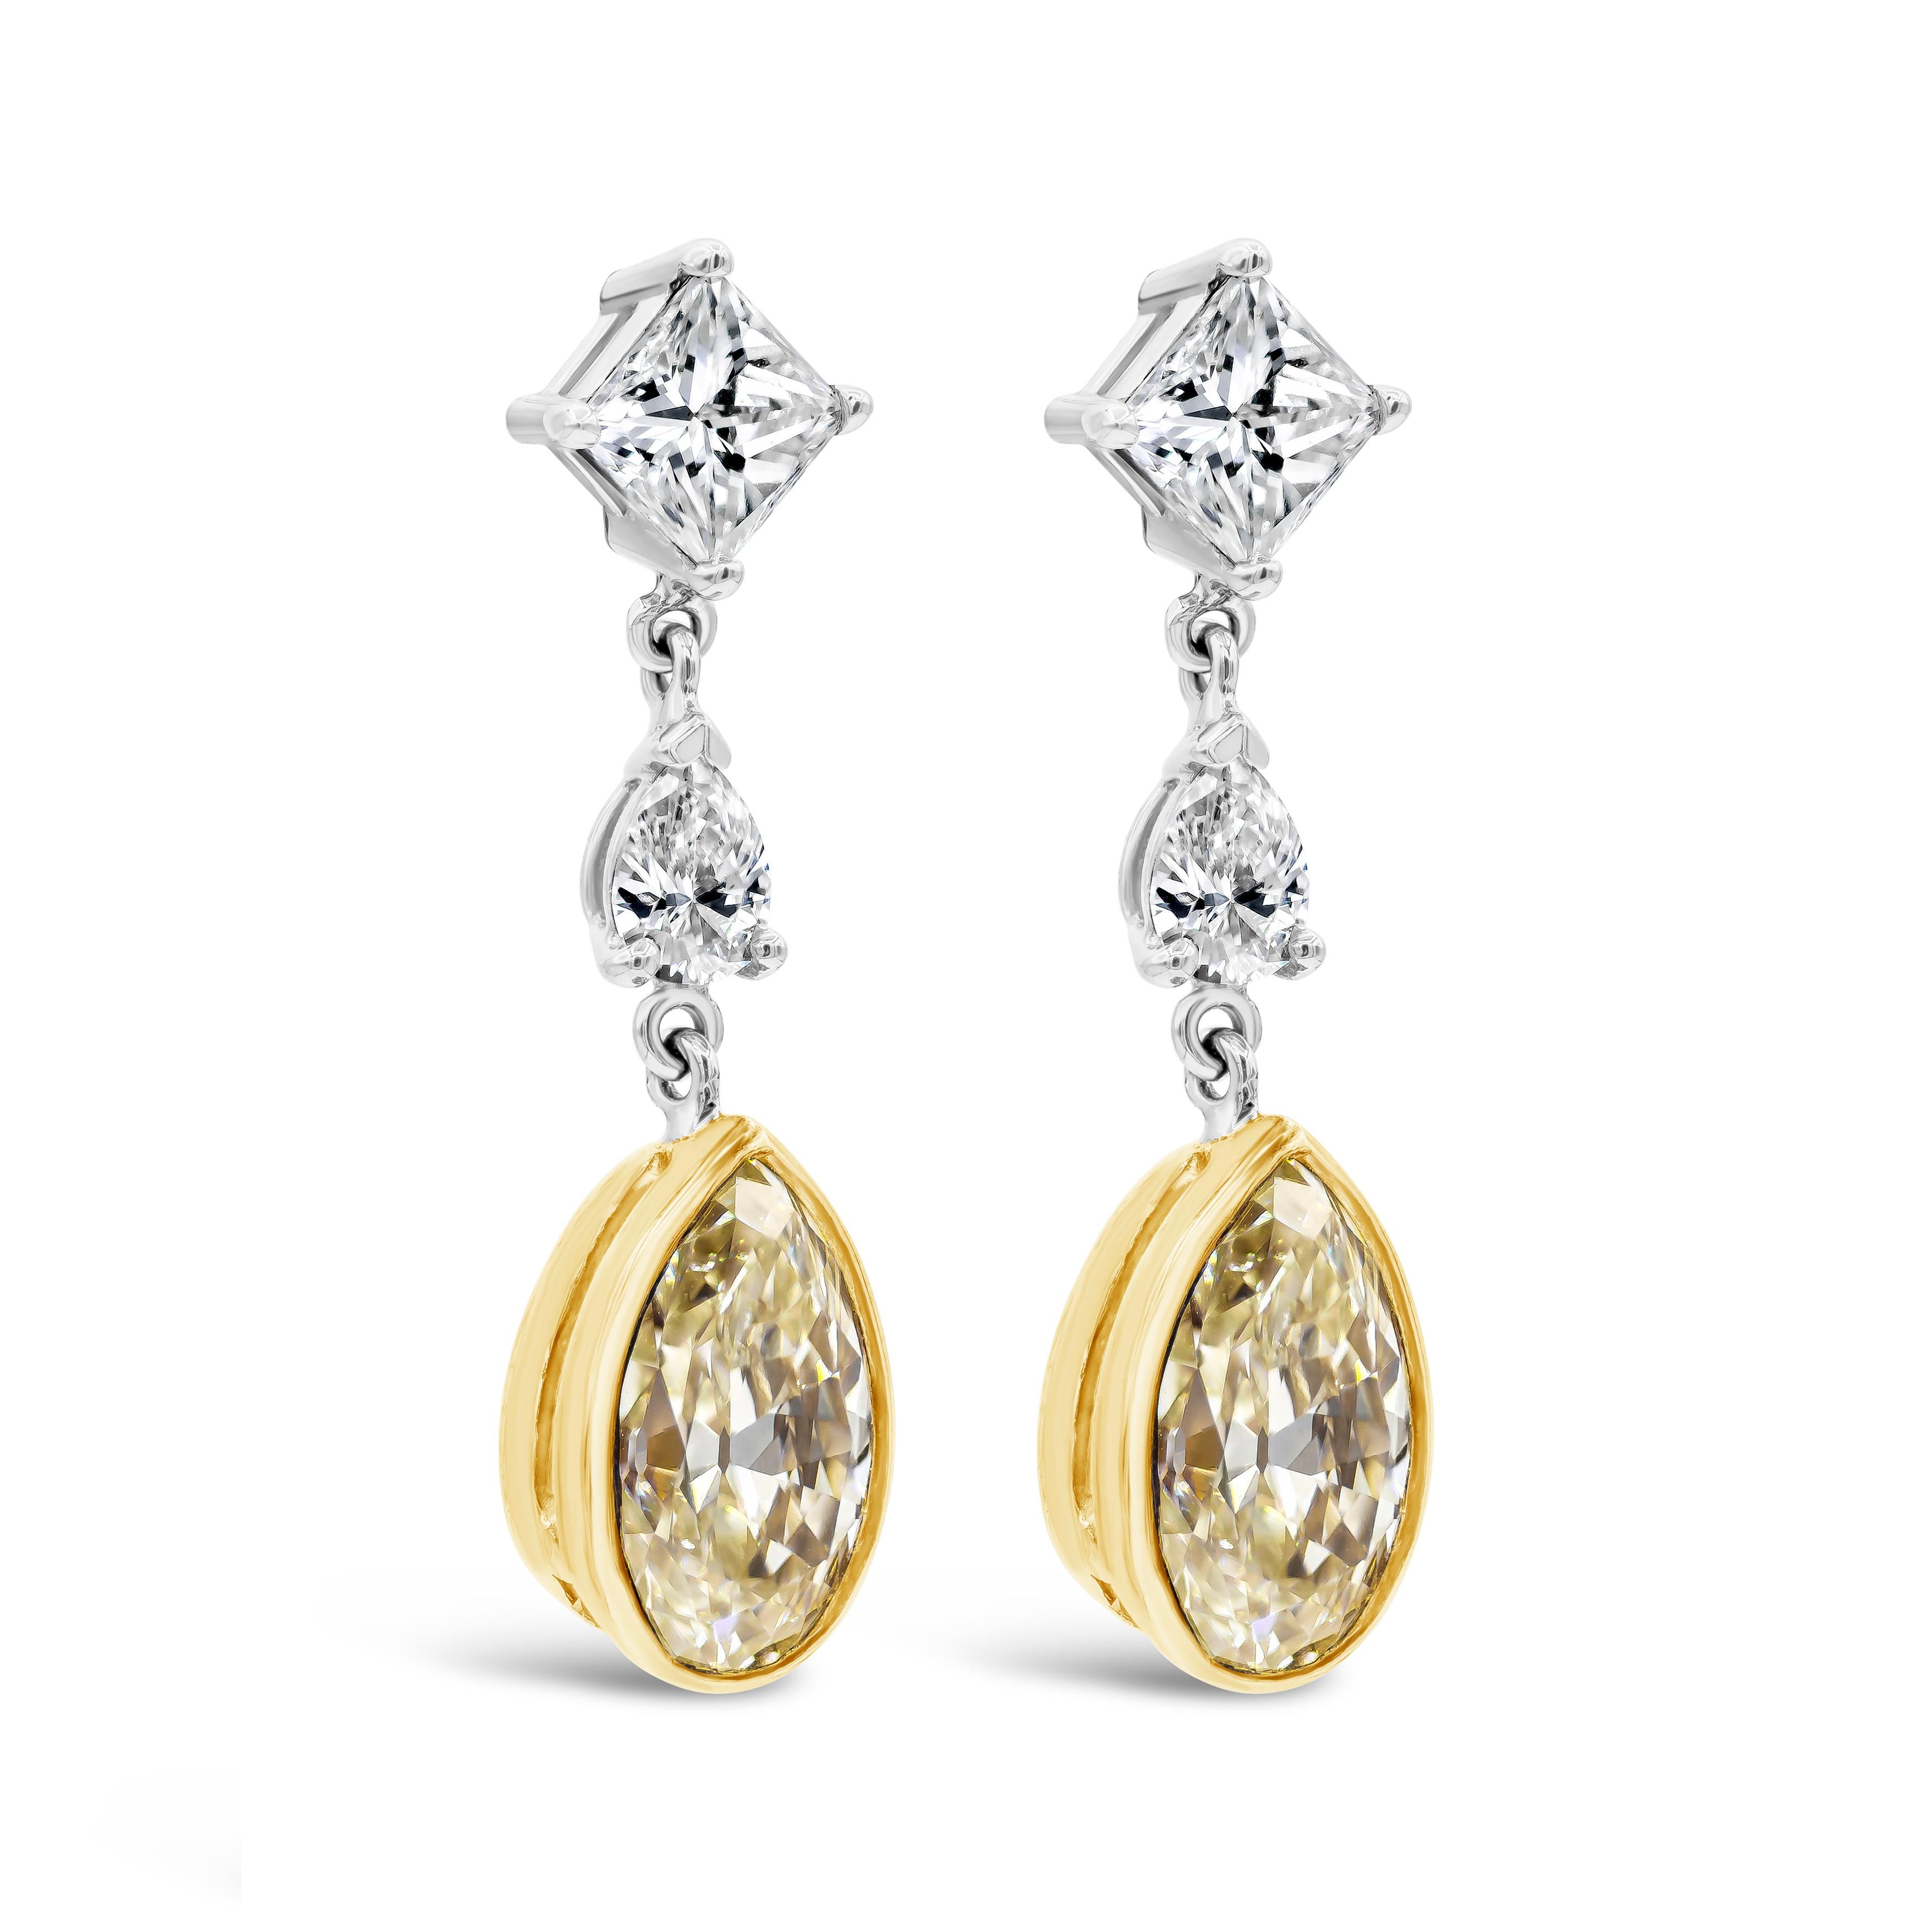 This elegant pair of earrings showcases a pear shape yellow diamonds, weighing 2.46 carats total, bezel set in 18k white gold. Suspended on a smaller pear shape diamond and a princess cut diamond post. White diamonds weigh 1.00 carats total.

Style